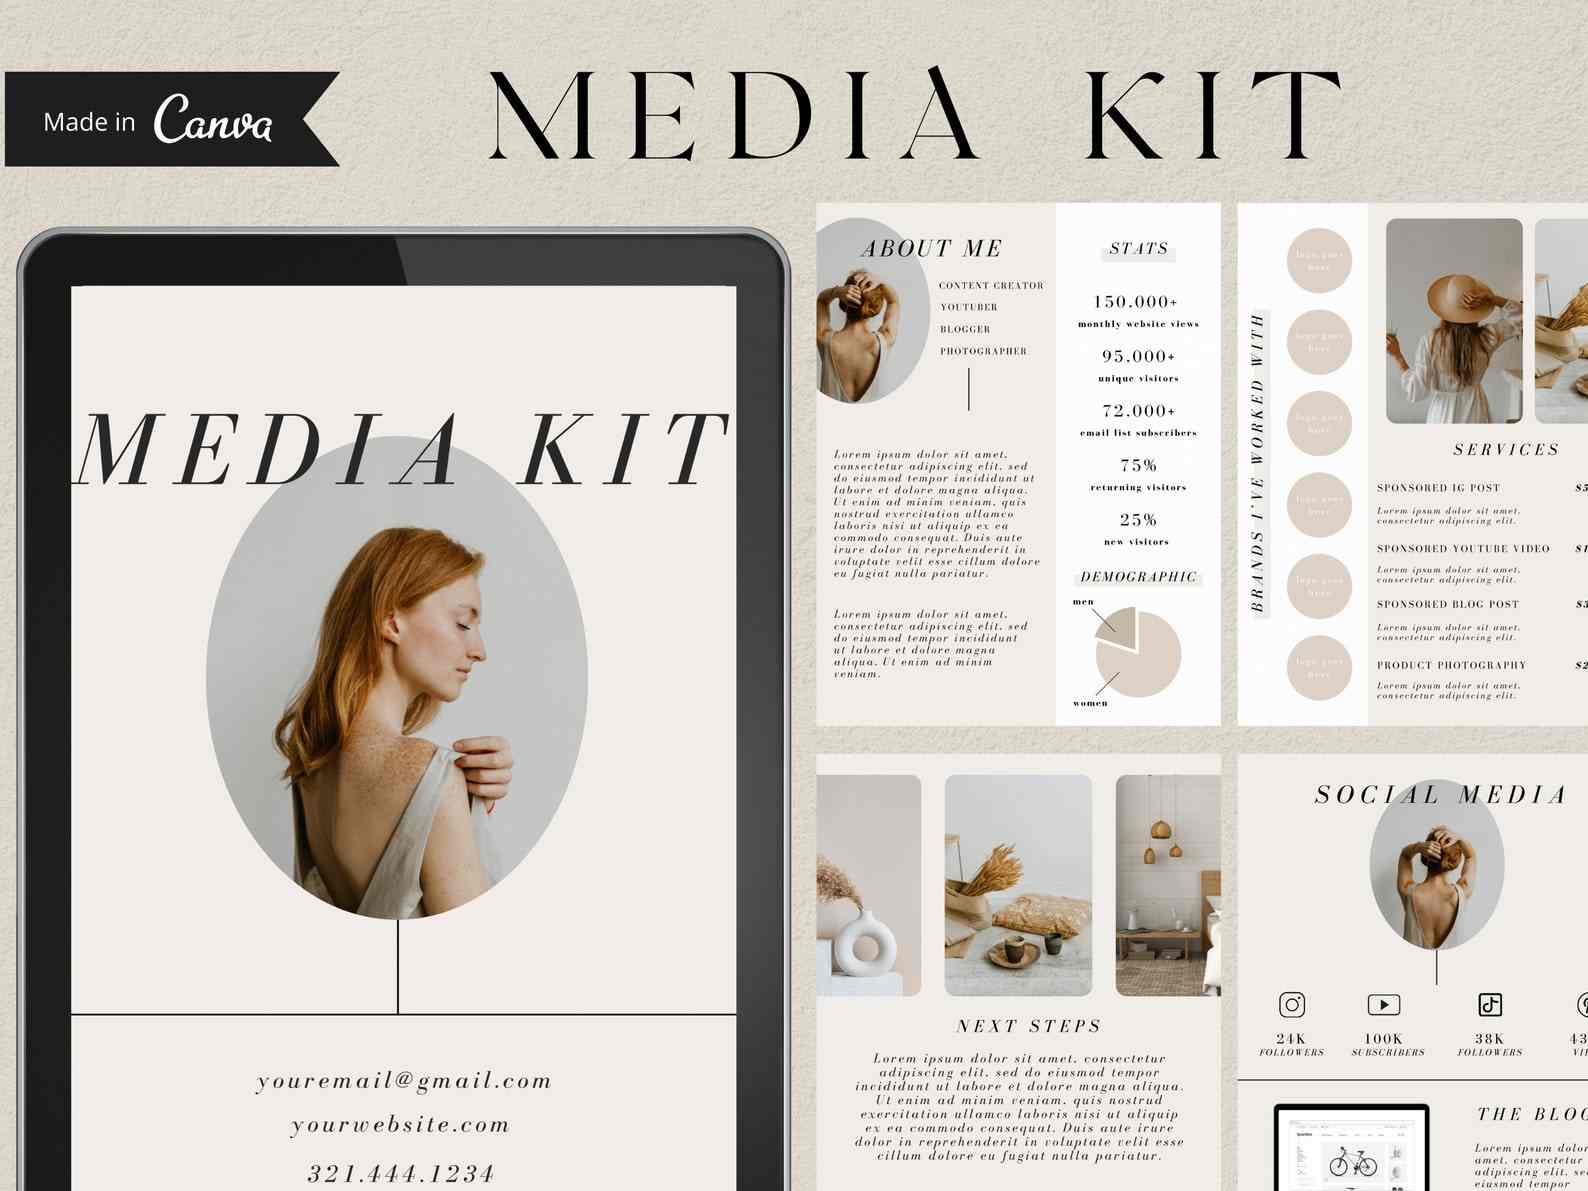 Example of a media kit